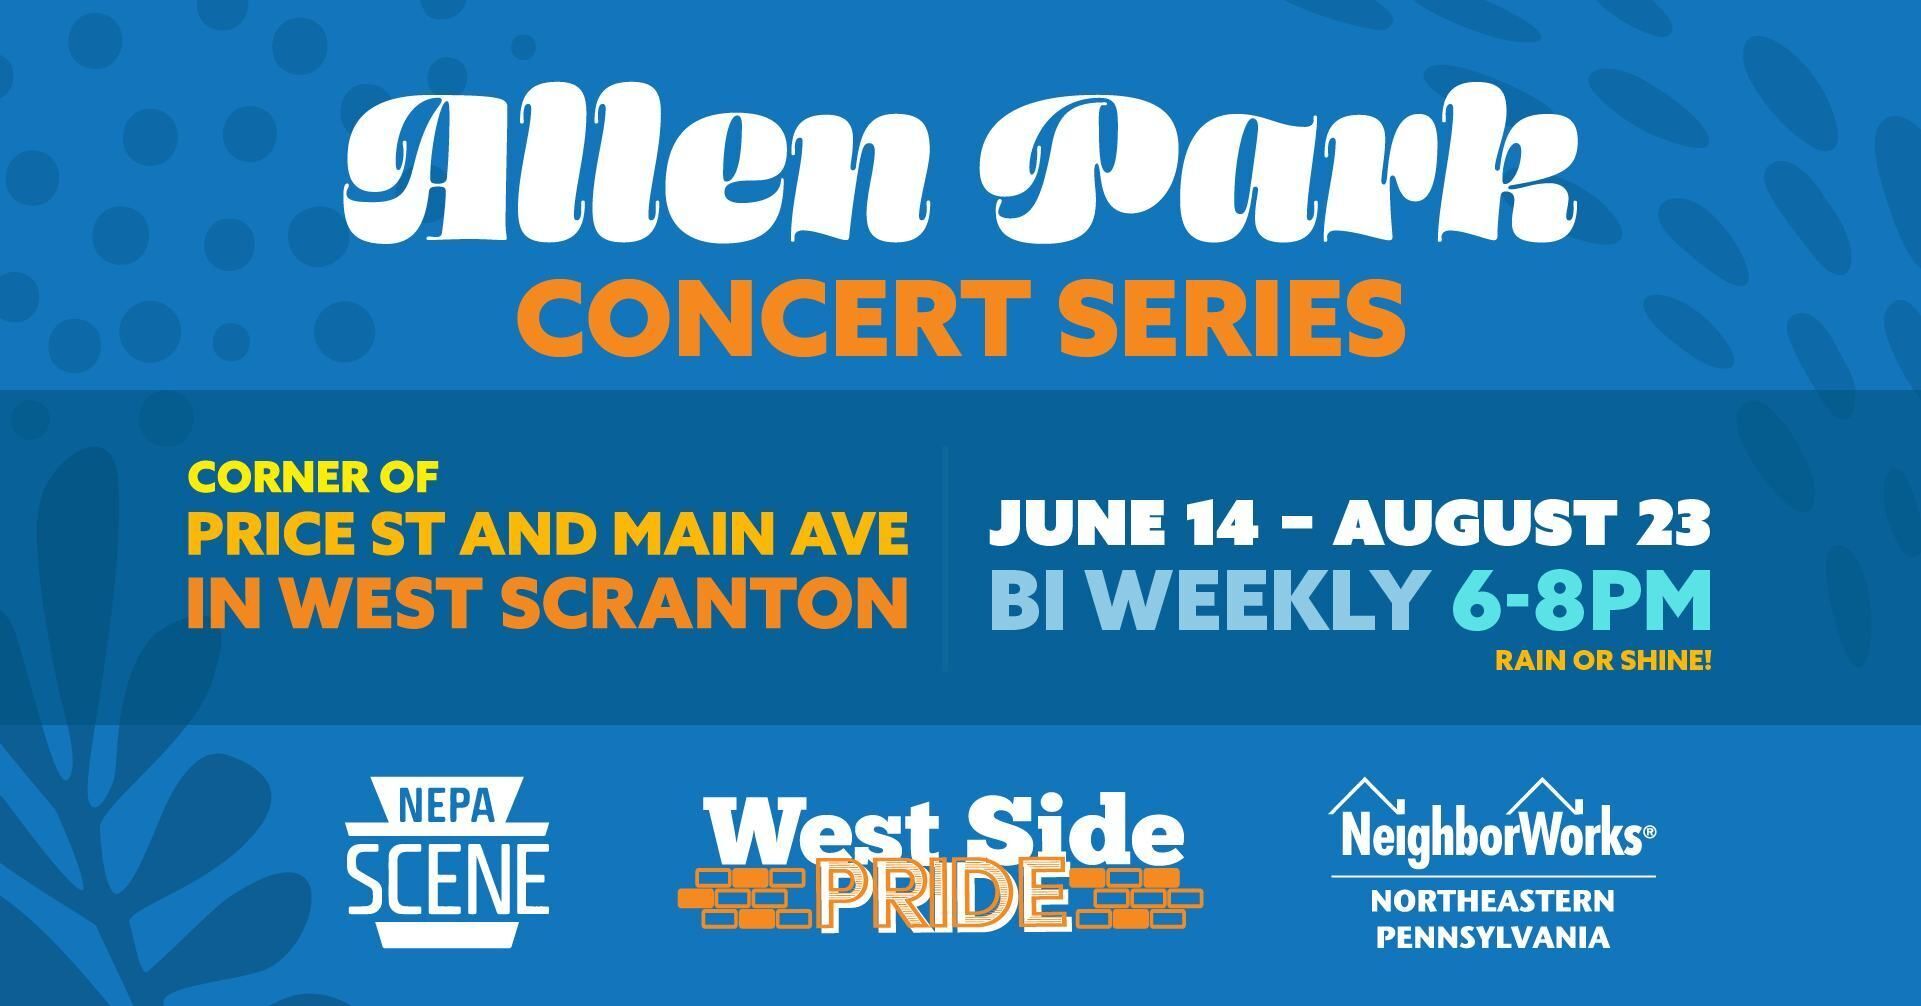 Join us at the Allen Park Concert Series!